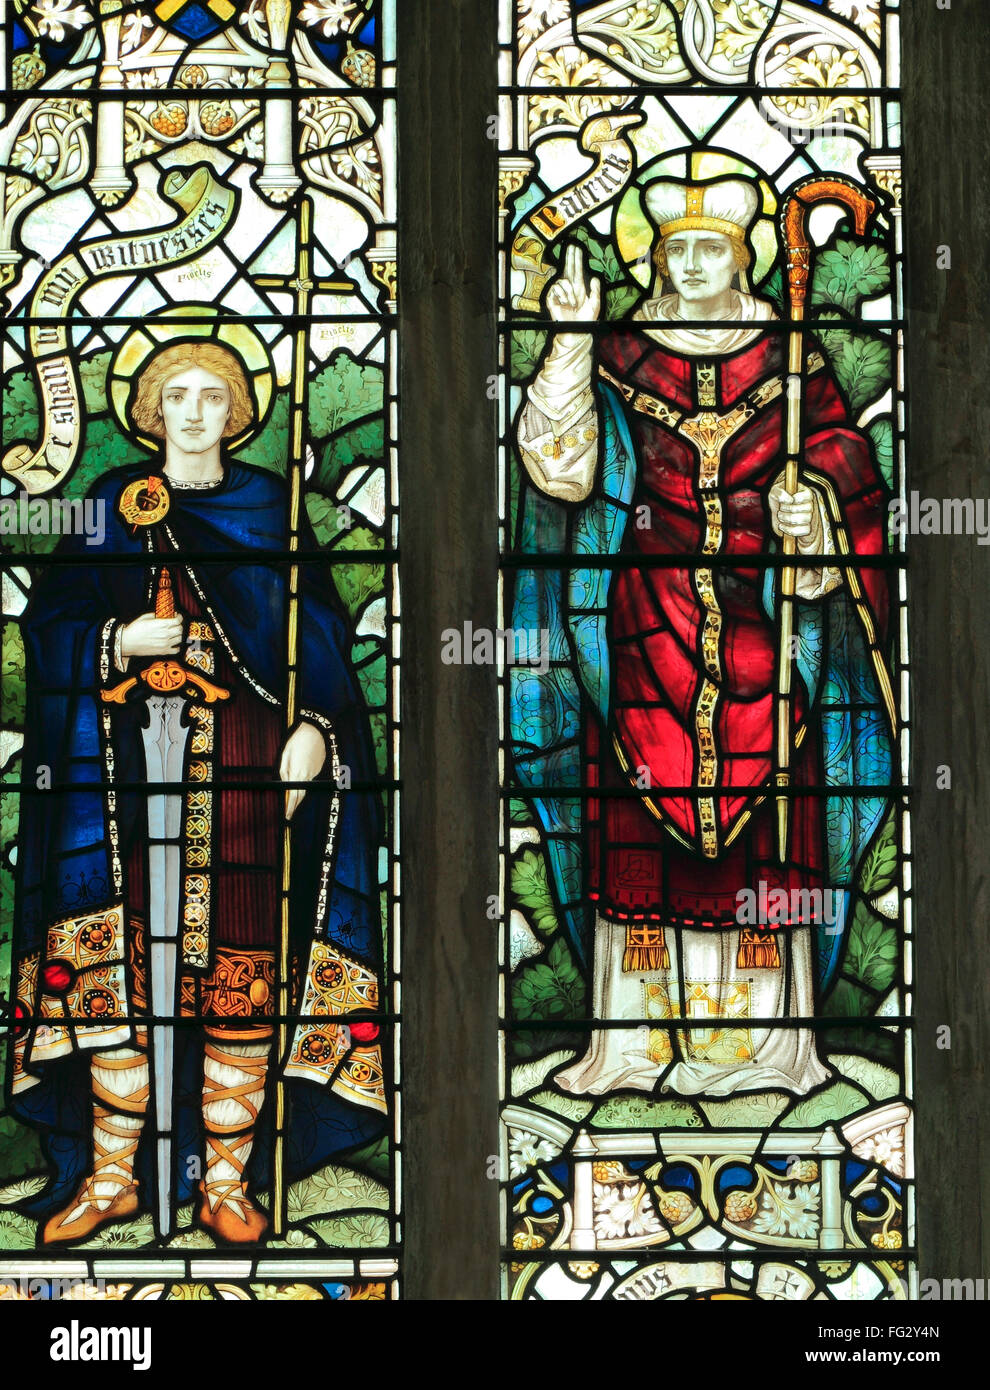 St. Alban and St. Patrick, stained glass window by J. Powell & son, 1900,  Blakeney, Norfolk, England, UK, Christian Saints Stock Photo